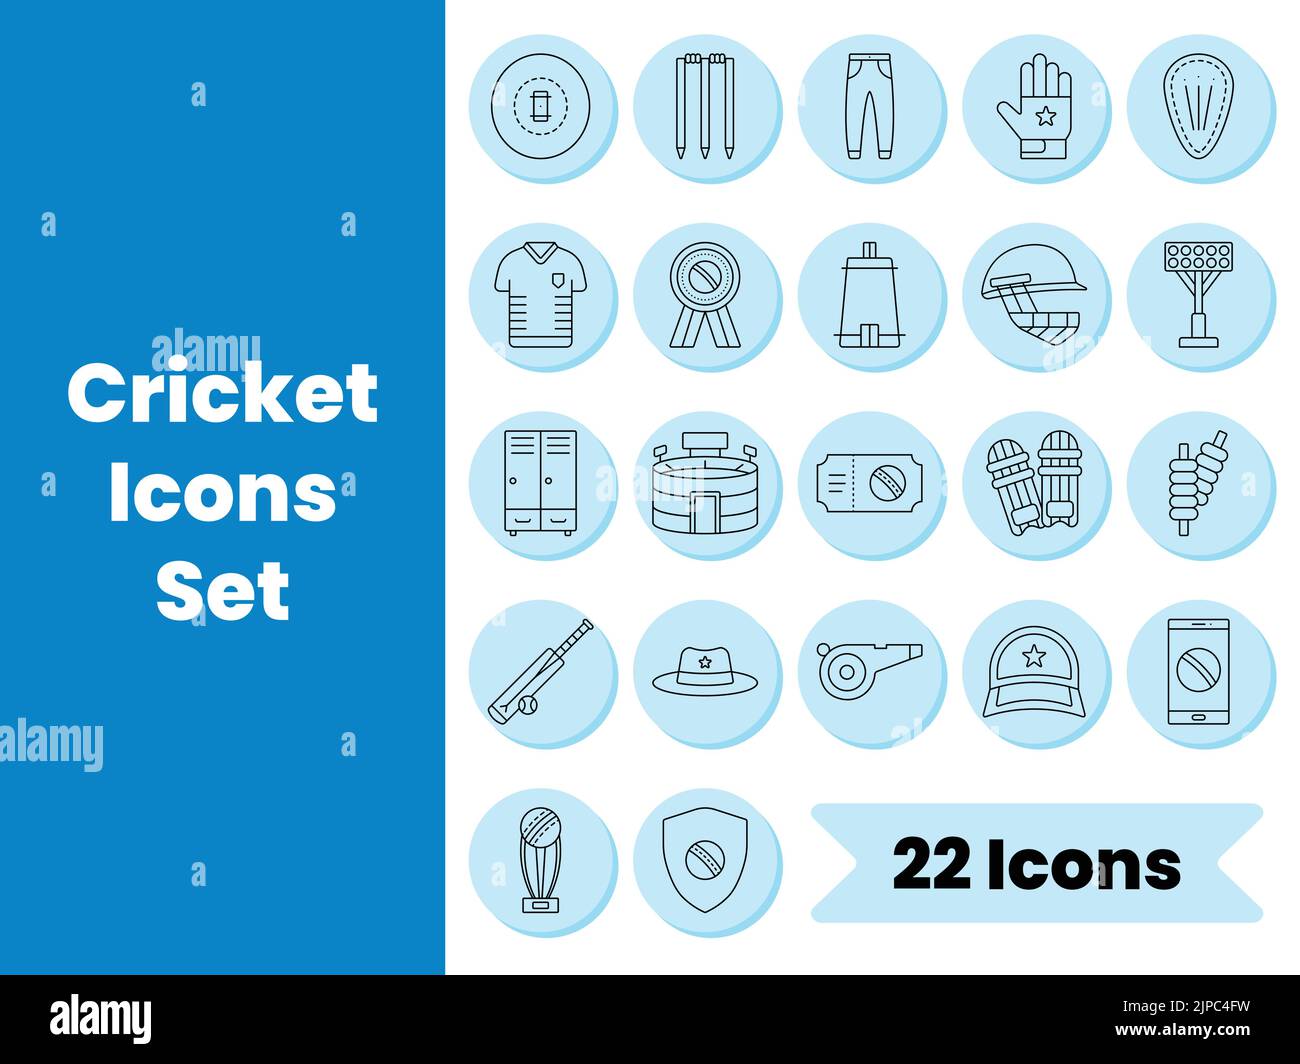 Isolated Cricket Icon Or Symbol Set On White And Blue Background. Stock Vector